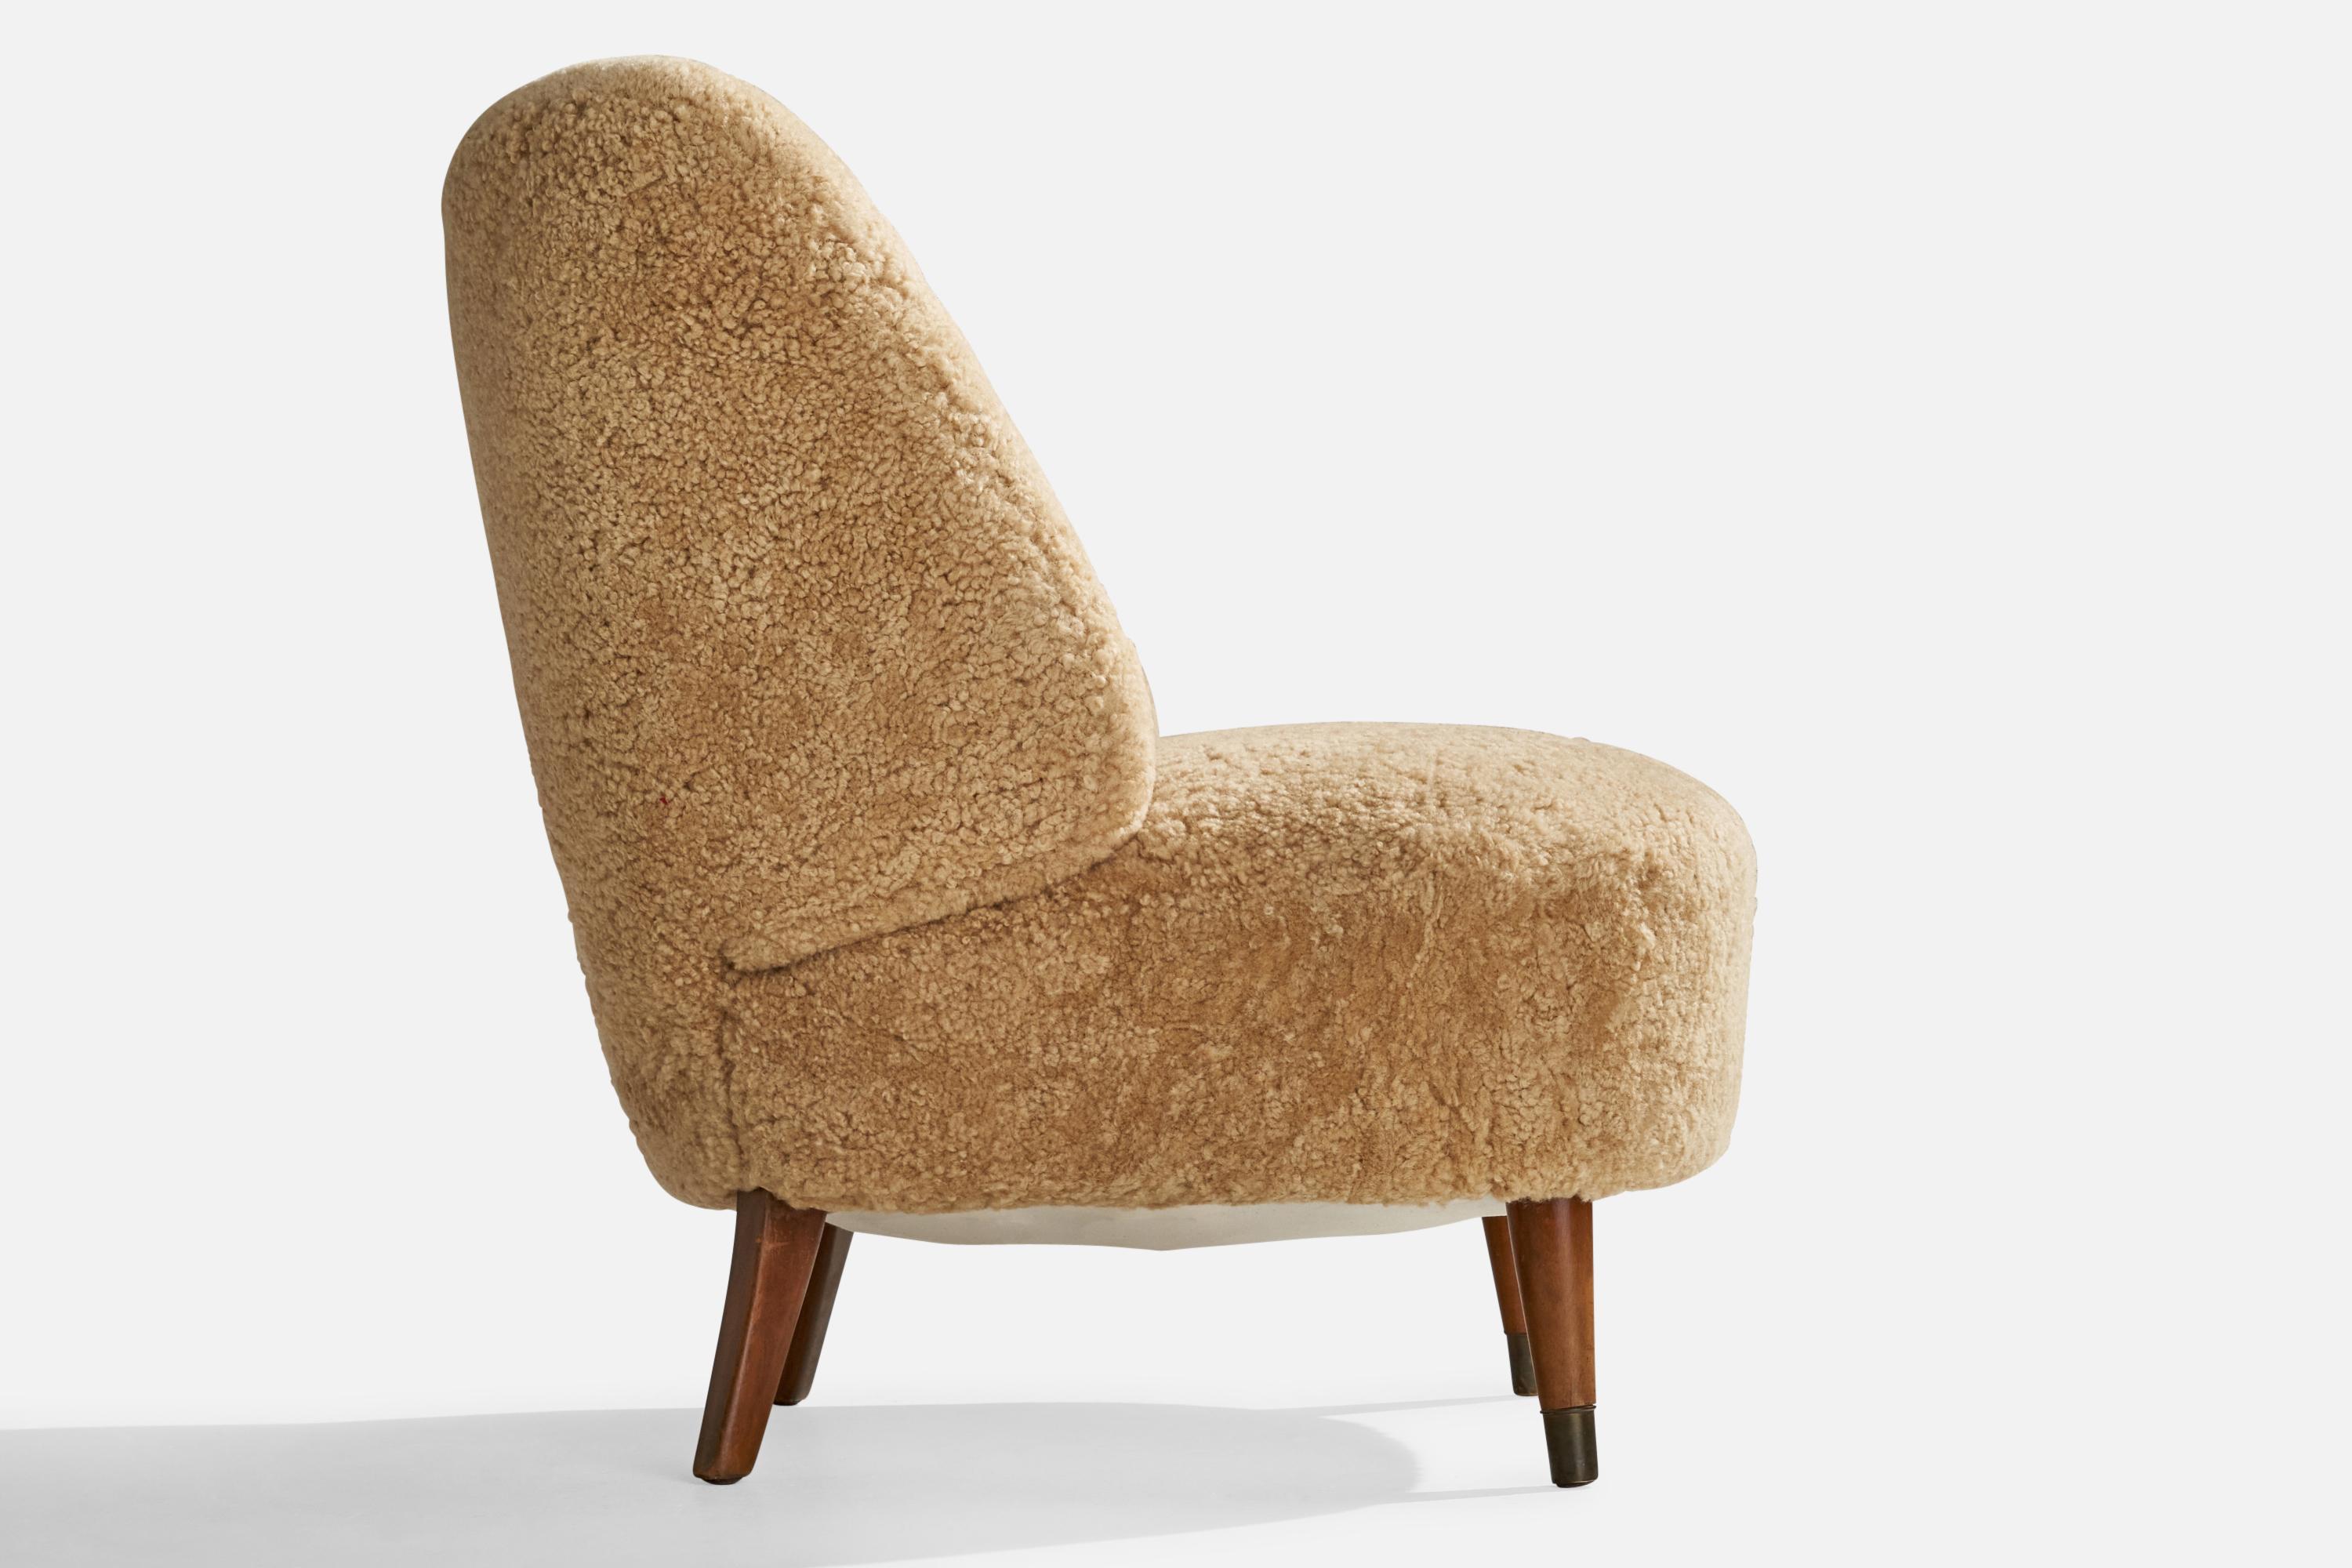 Sven Staaf, Lounge Chair, Shearling, Wood, Sweden, 1940s For Sale 1